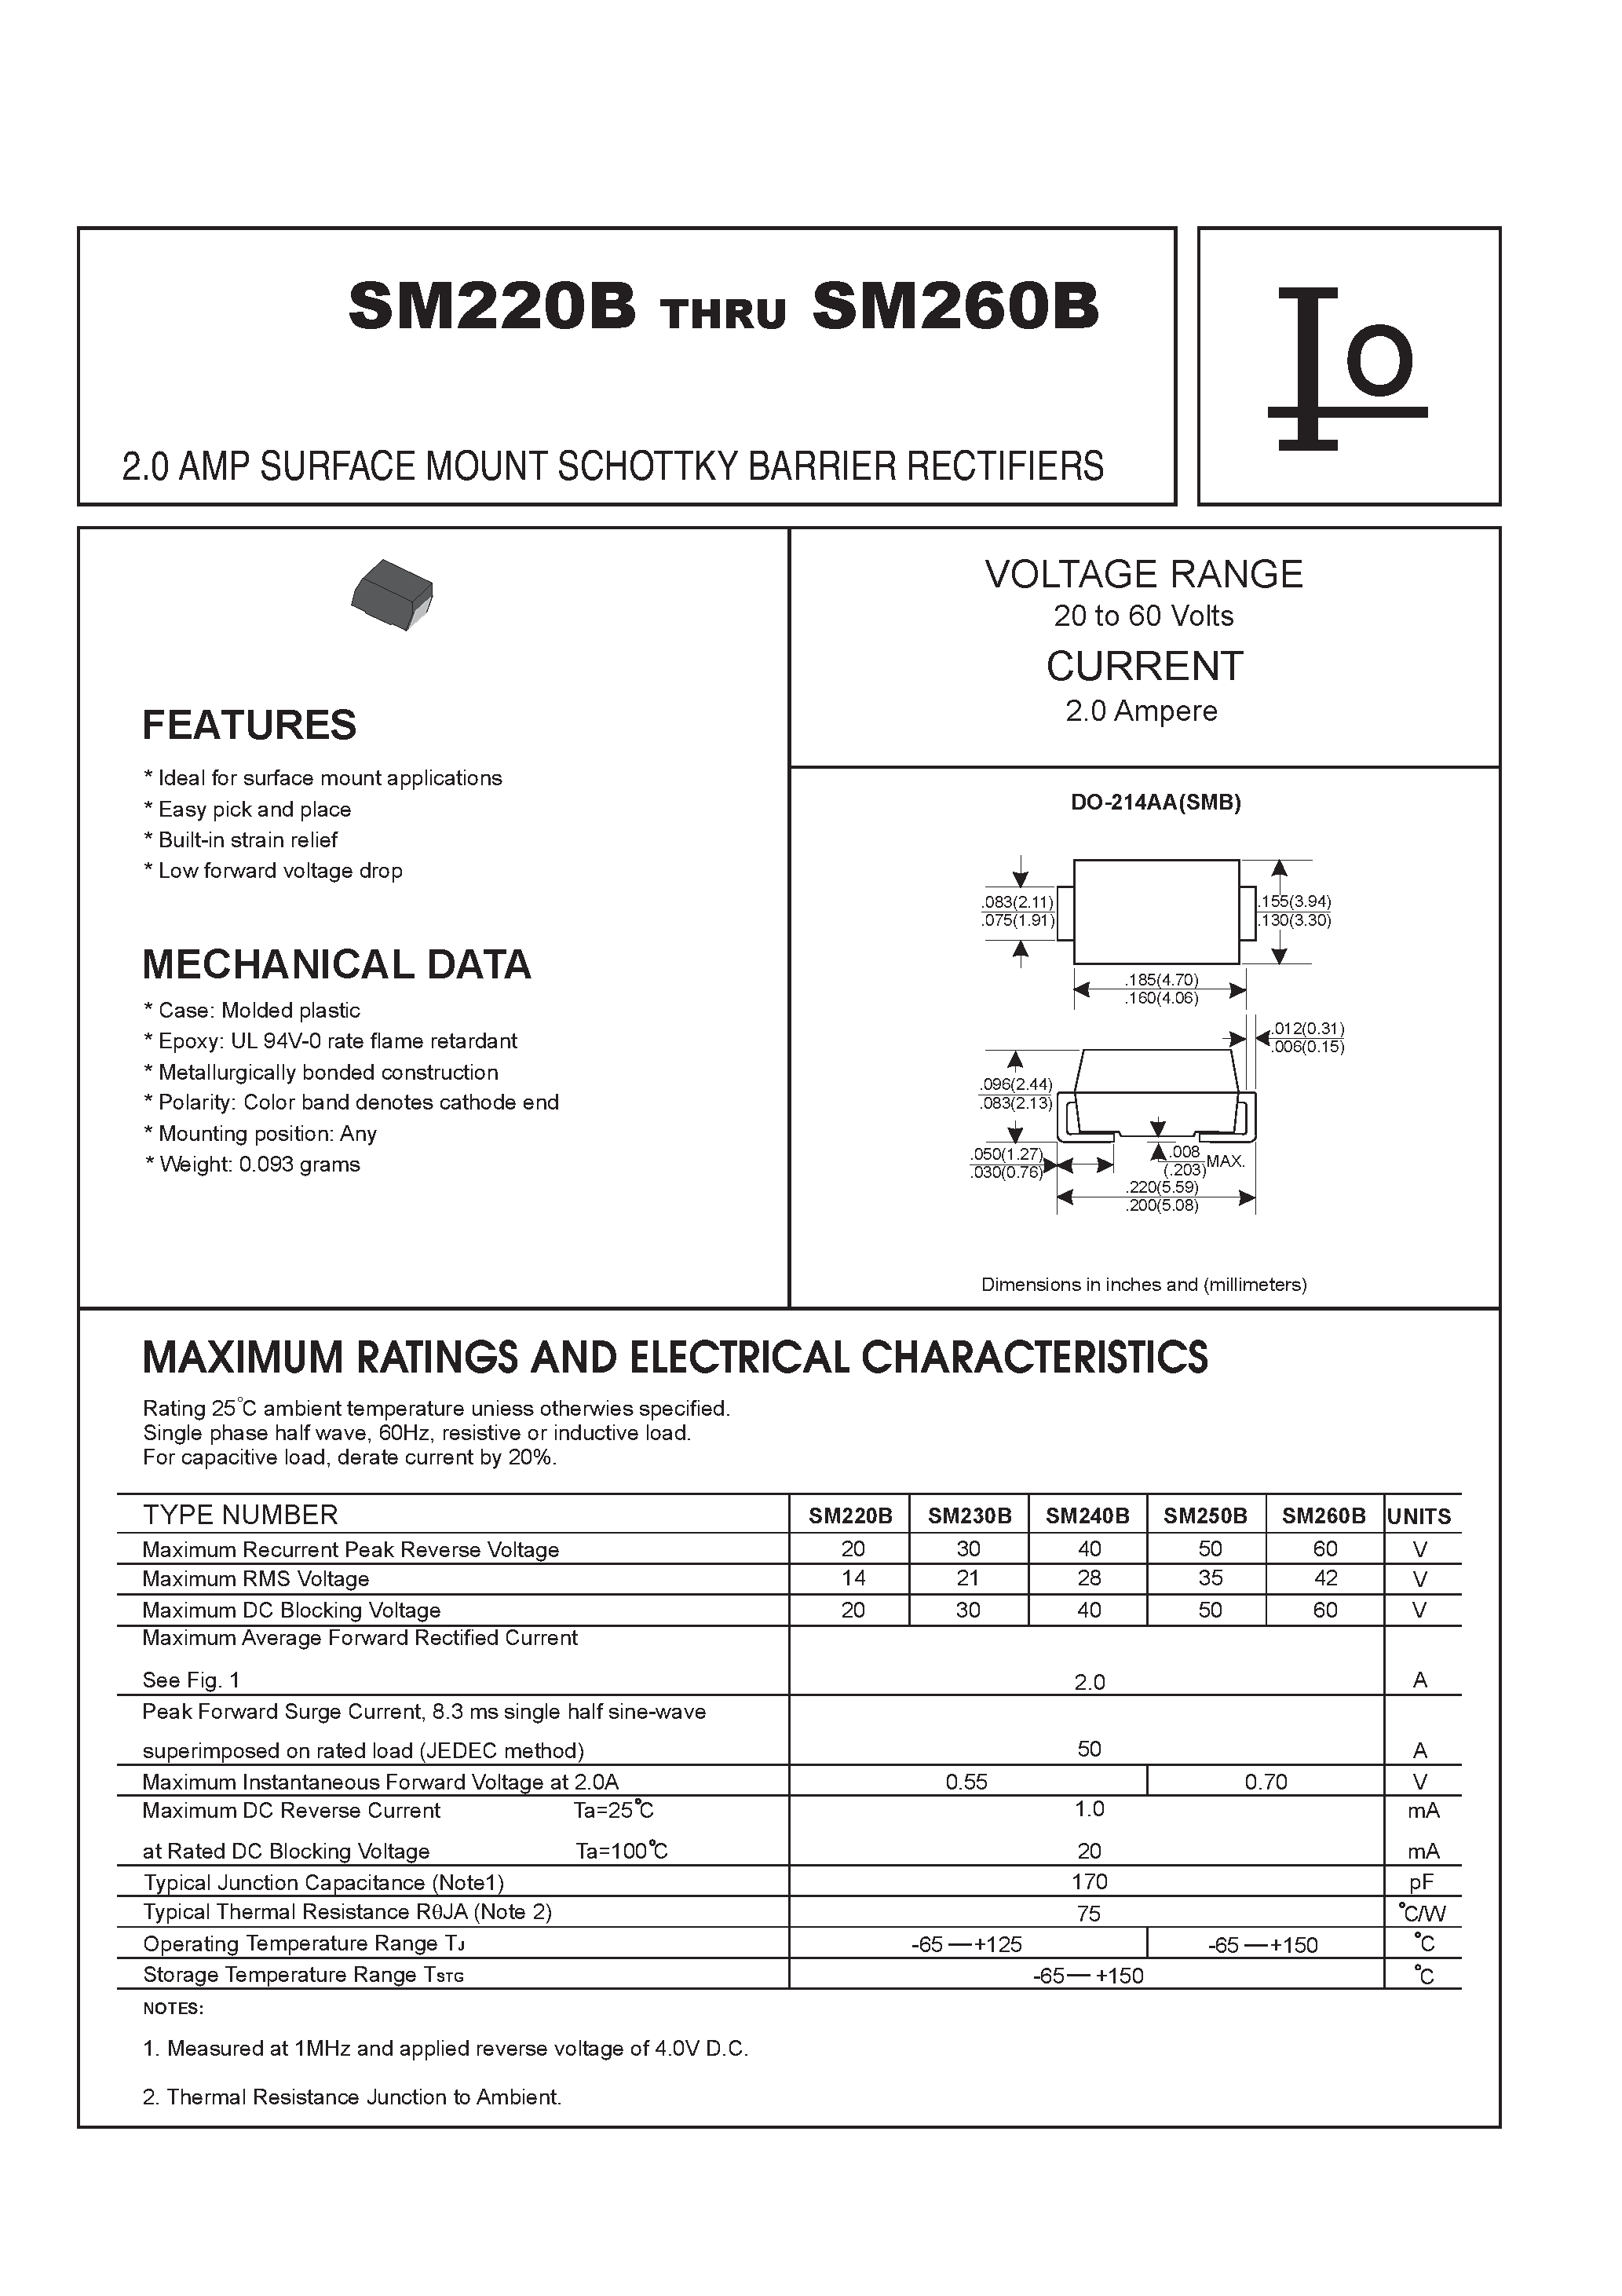 Datasheet SM230B - 2.0 AMP SURFACE MOUNT SCHOTTKY BARRIER RECTIFIERS page 1